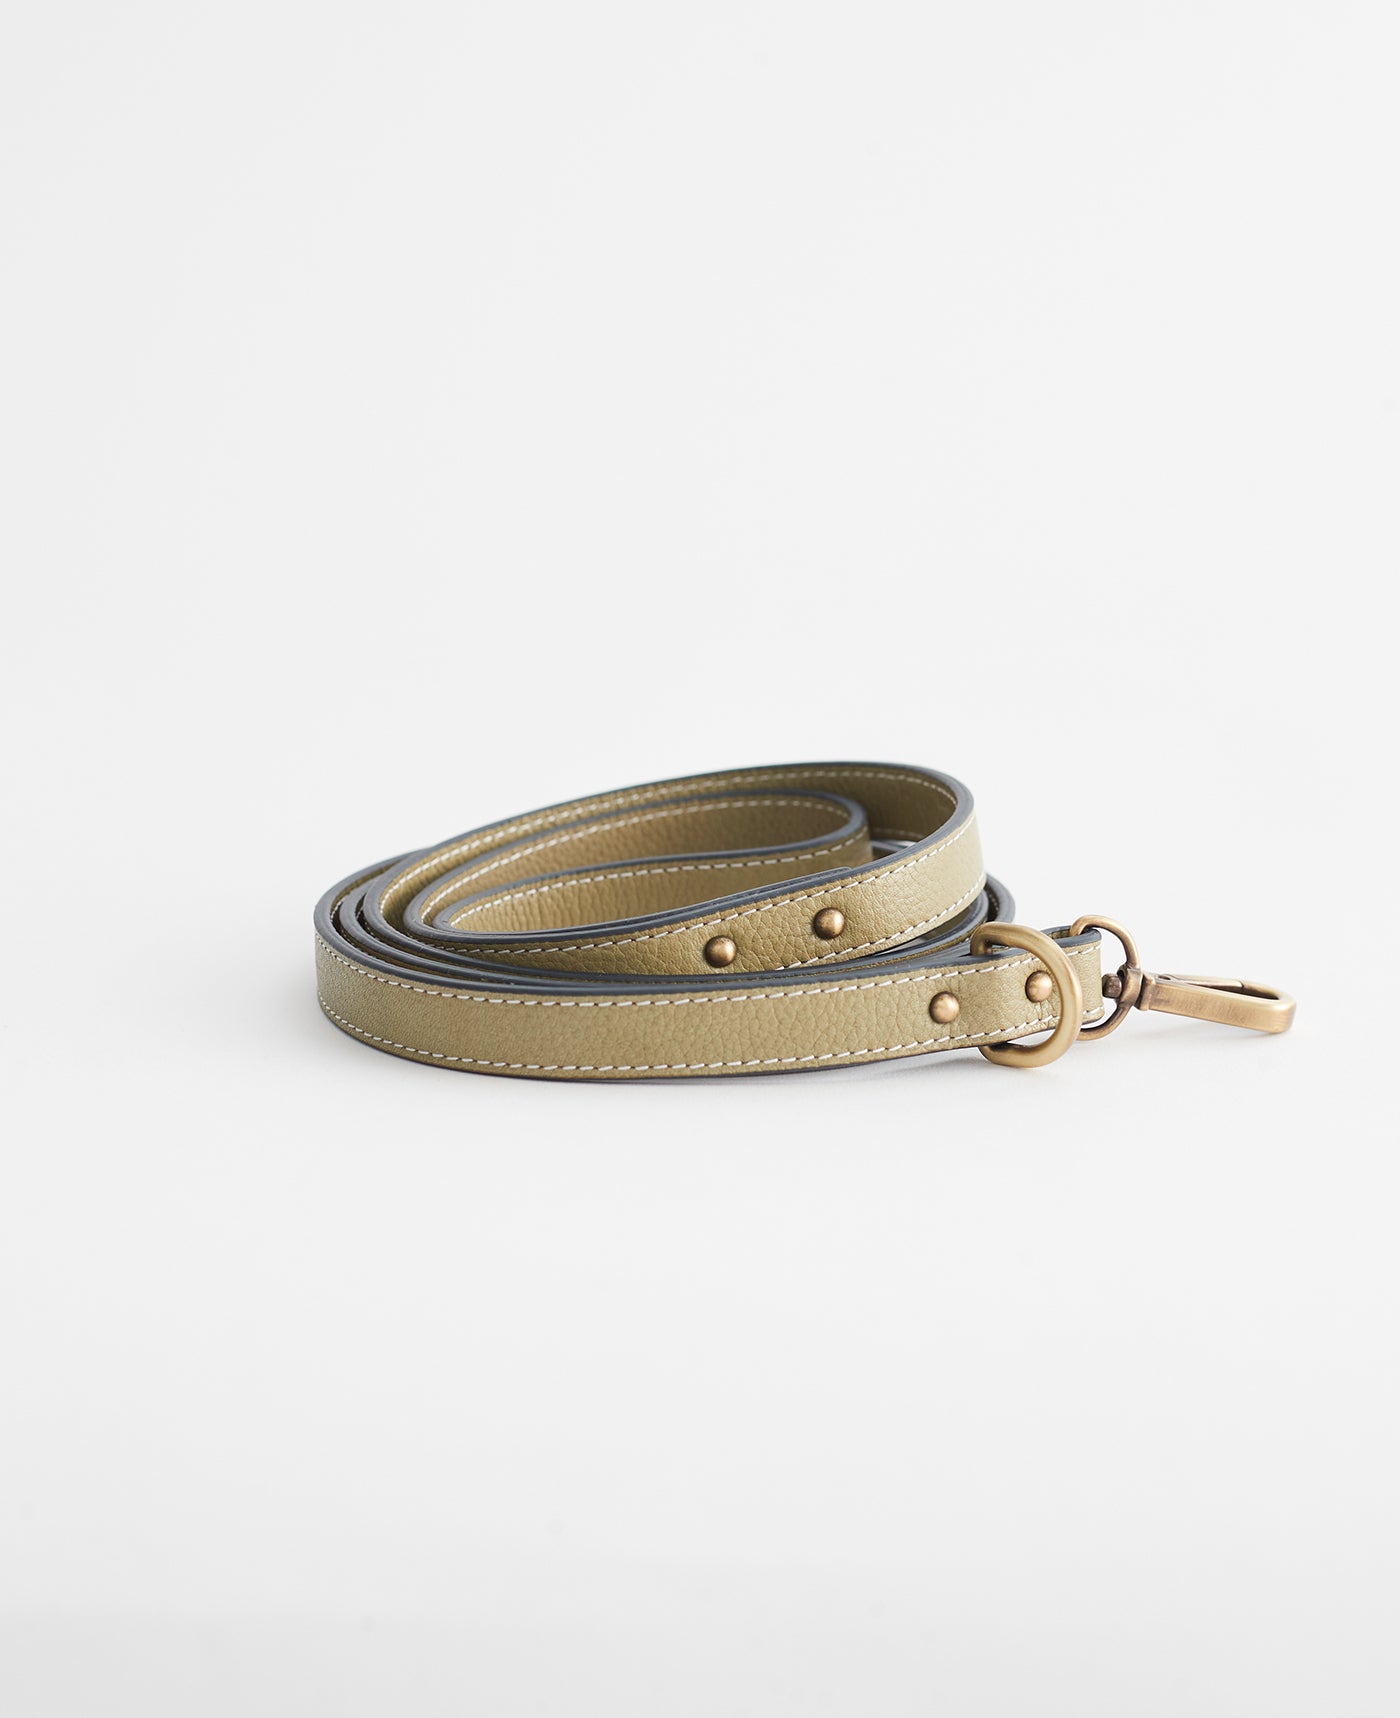 Leather Dog Lead/Leash in Avocado Green - Size Small by The Horse®